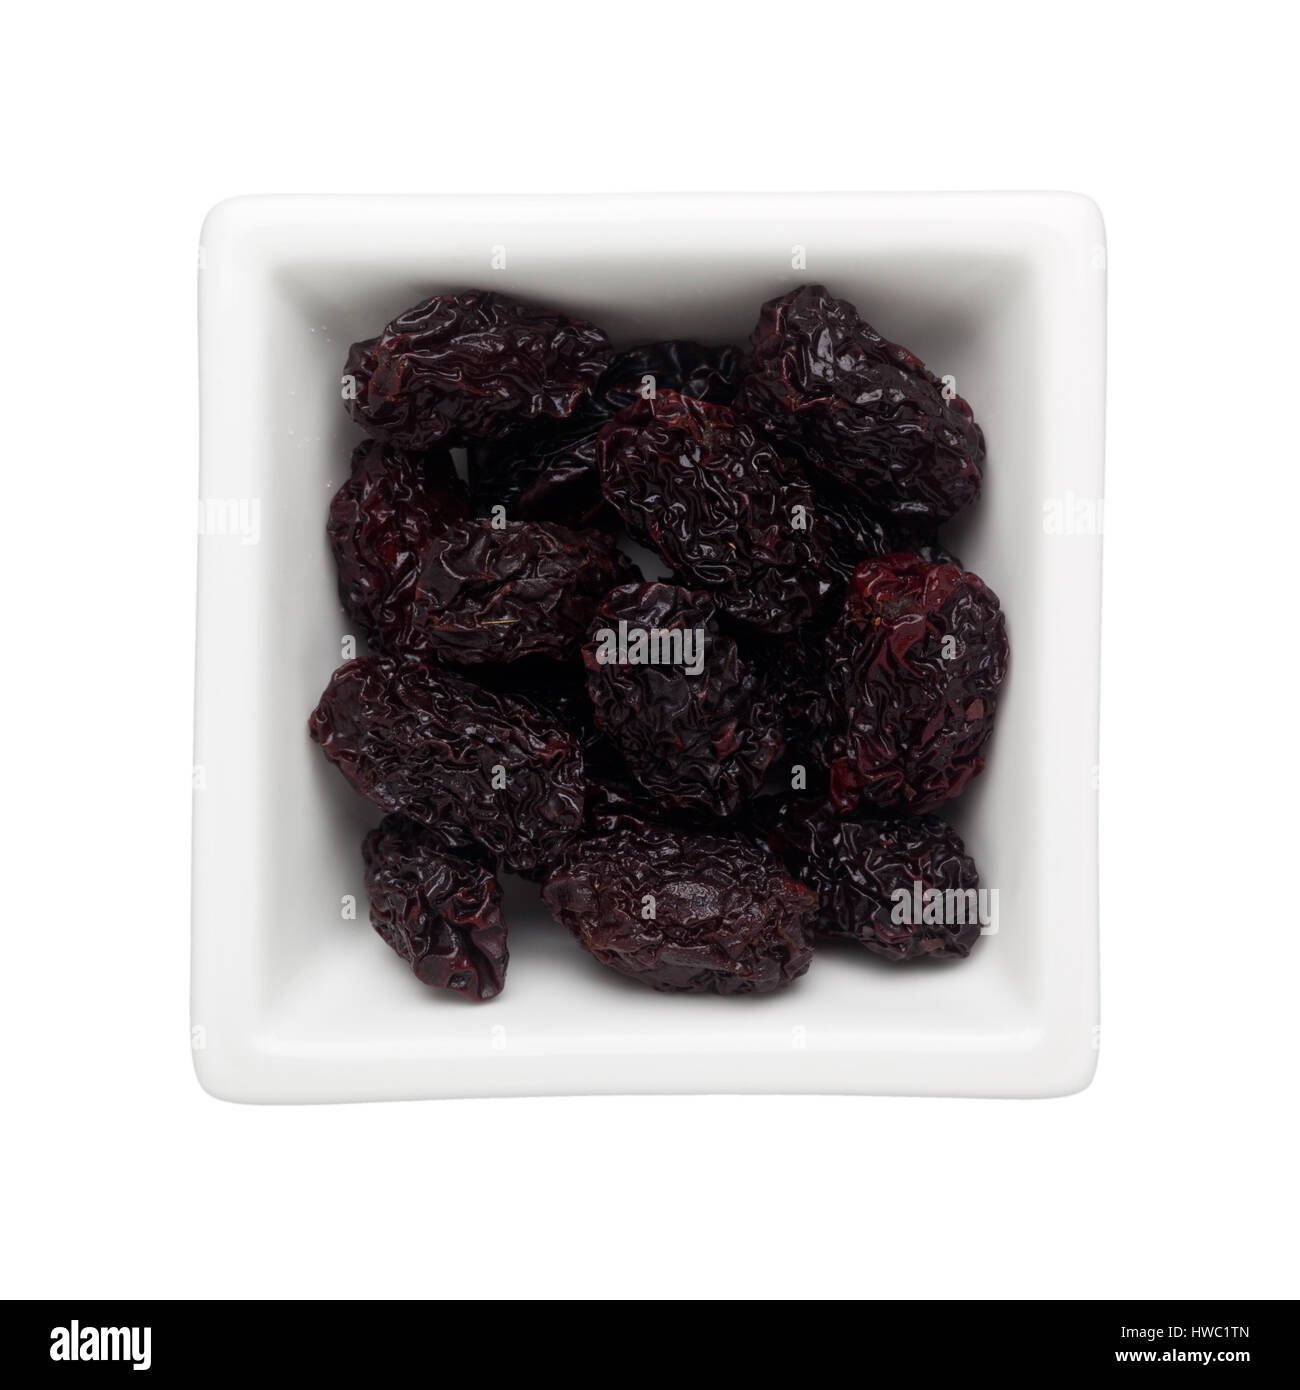 Dried black dates in a square bowl isolated on white background Stock Photo